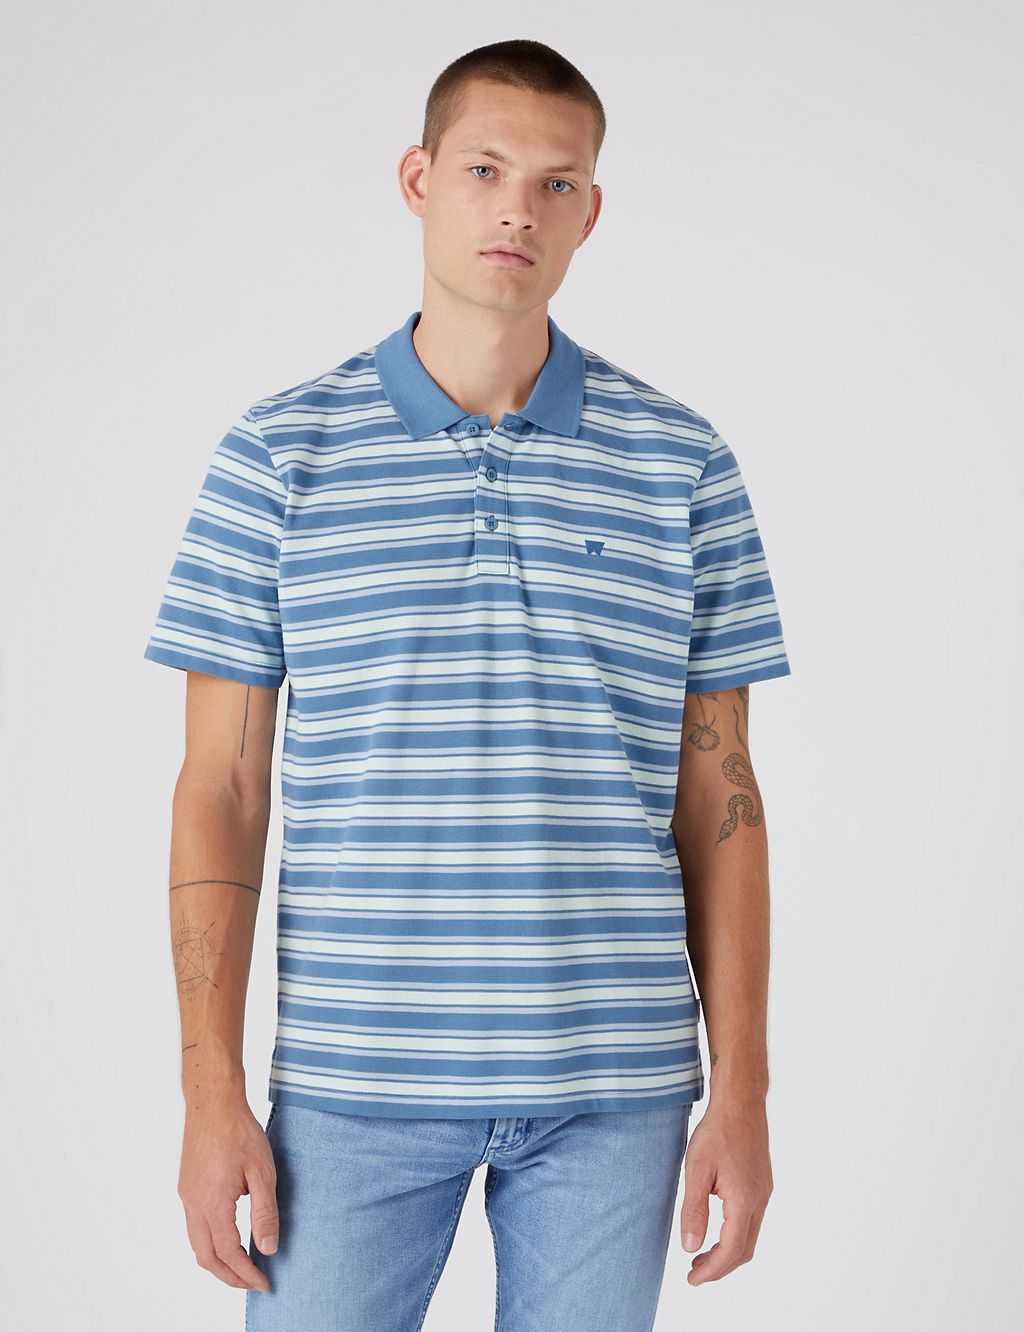 Relaxed Fit Pure Cotton Striped Polo Shirt | Wrangler | M&S